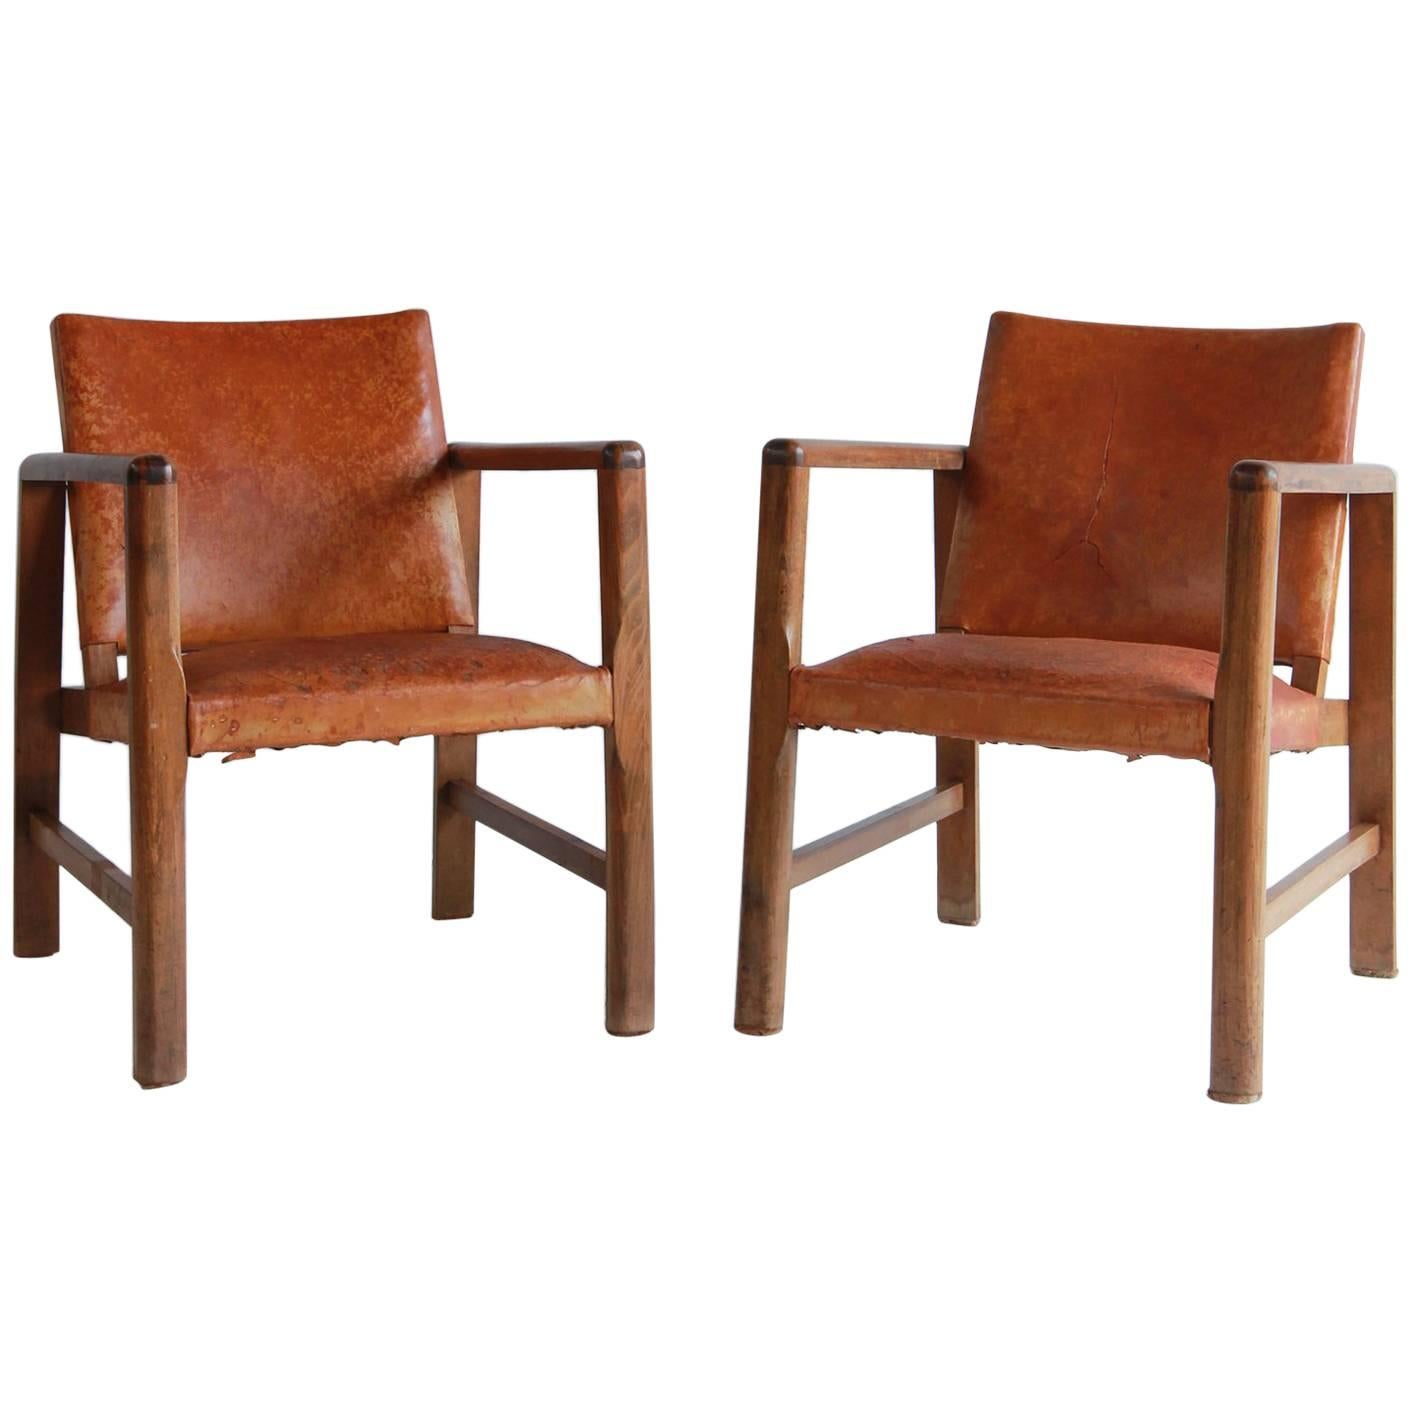 Pair of Borge Mogensen Style Leather and Wood Chairs